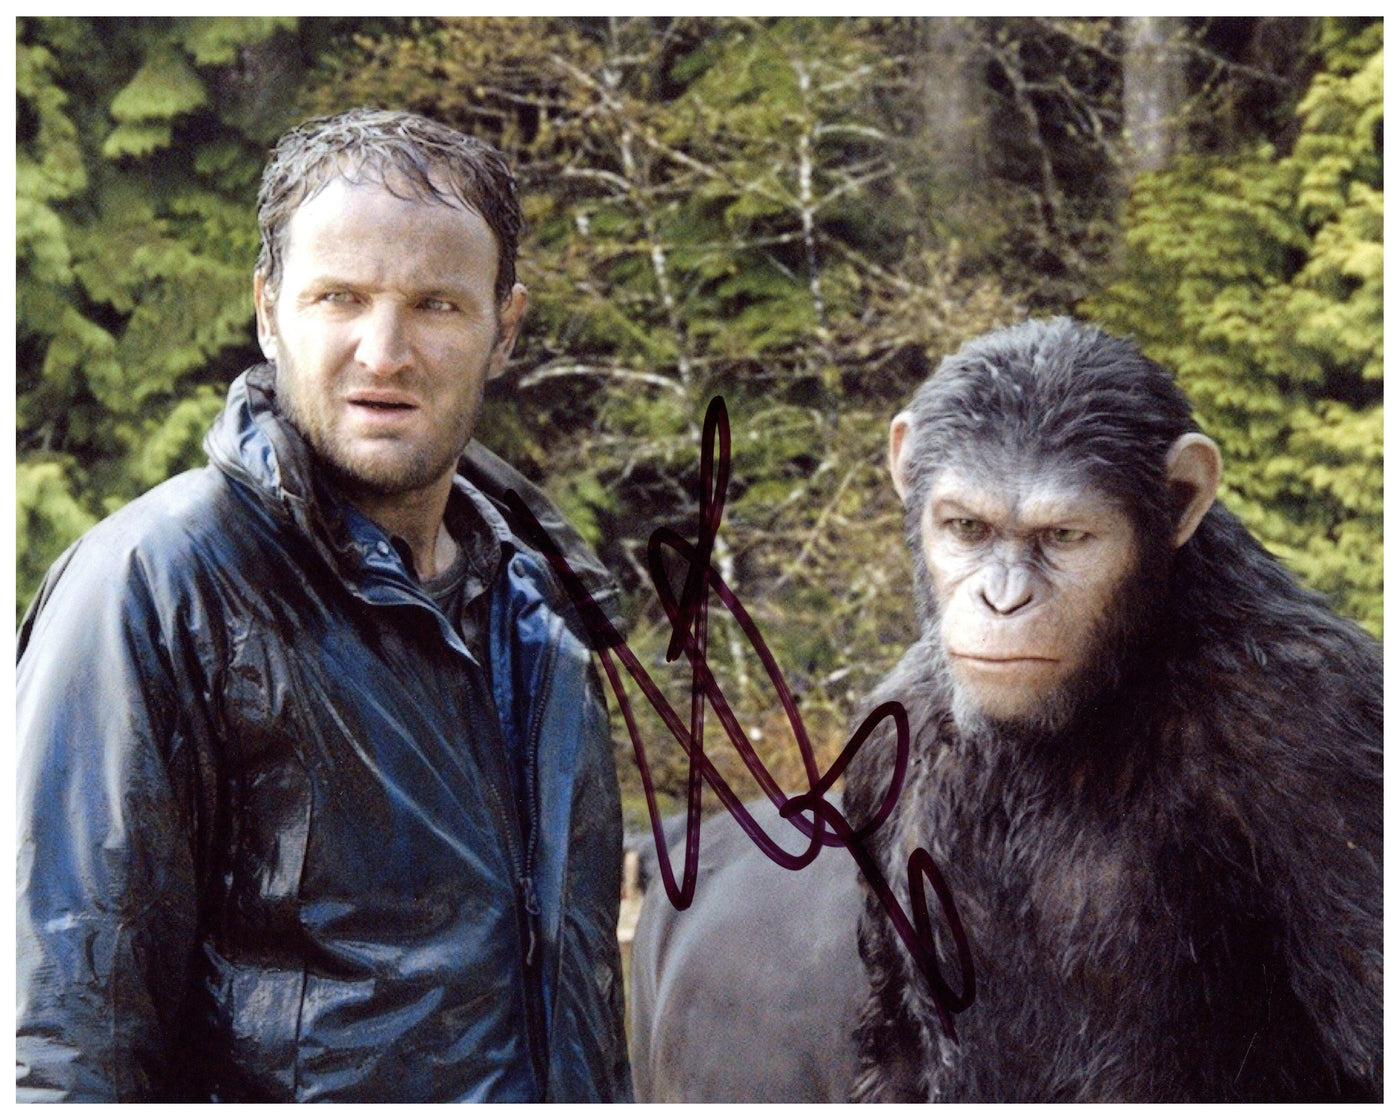 Jason Clarke Signed 8x10 Photo Dawn of the Planet of the Apes Autographed ACOA